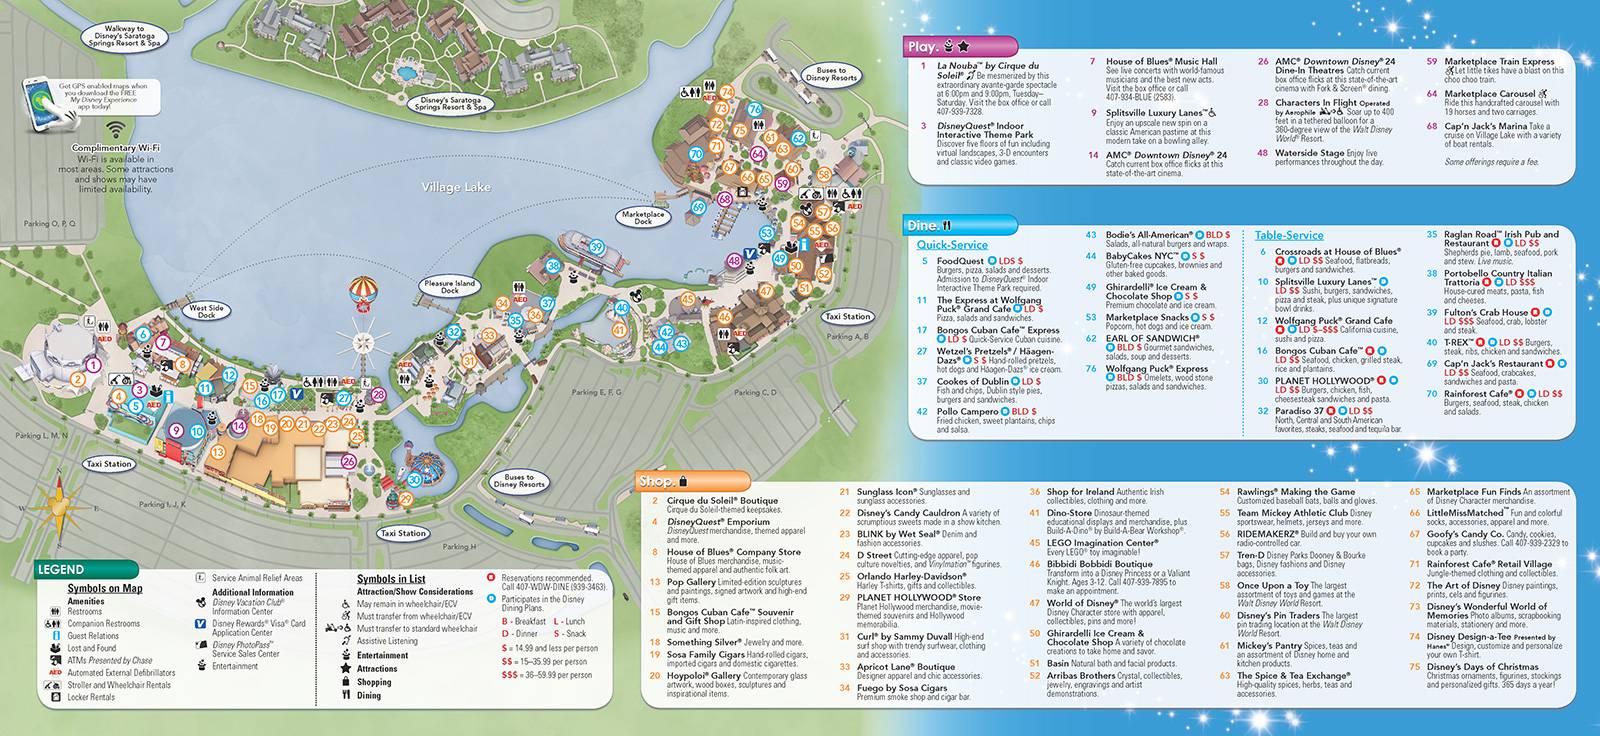 New 2013 Downtown Disney Guidemap Page 2